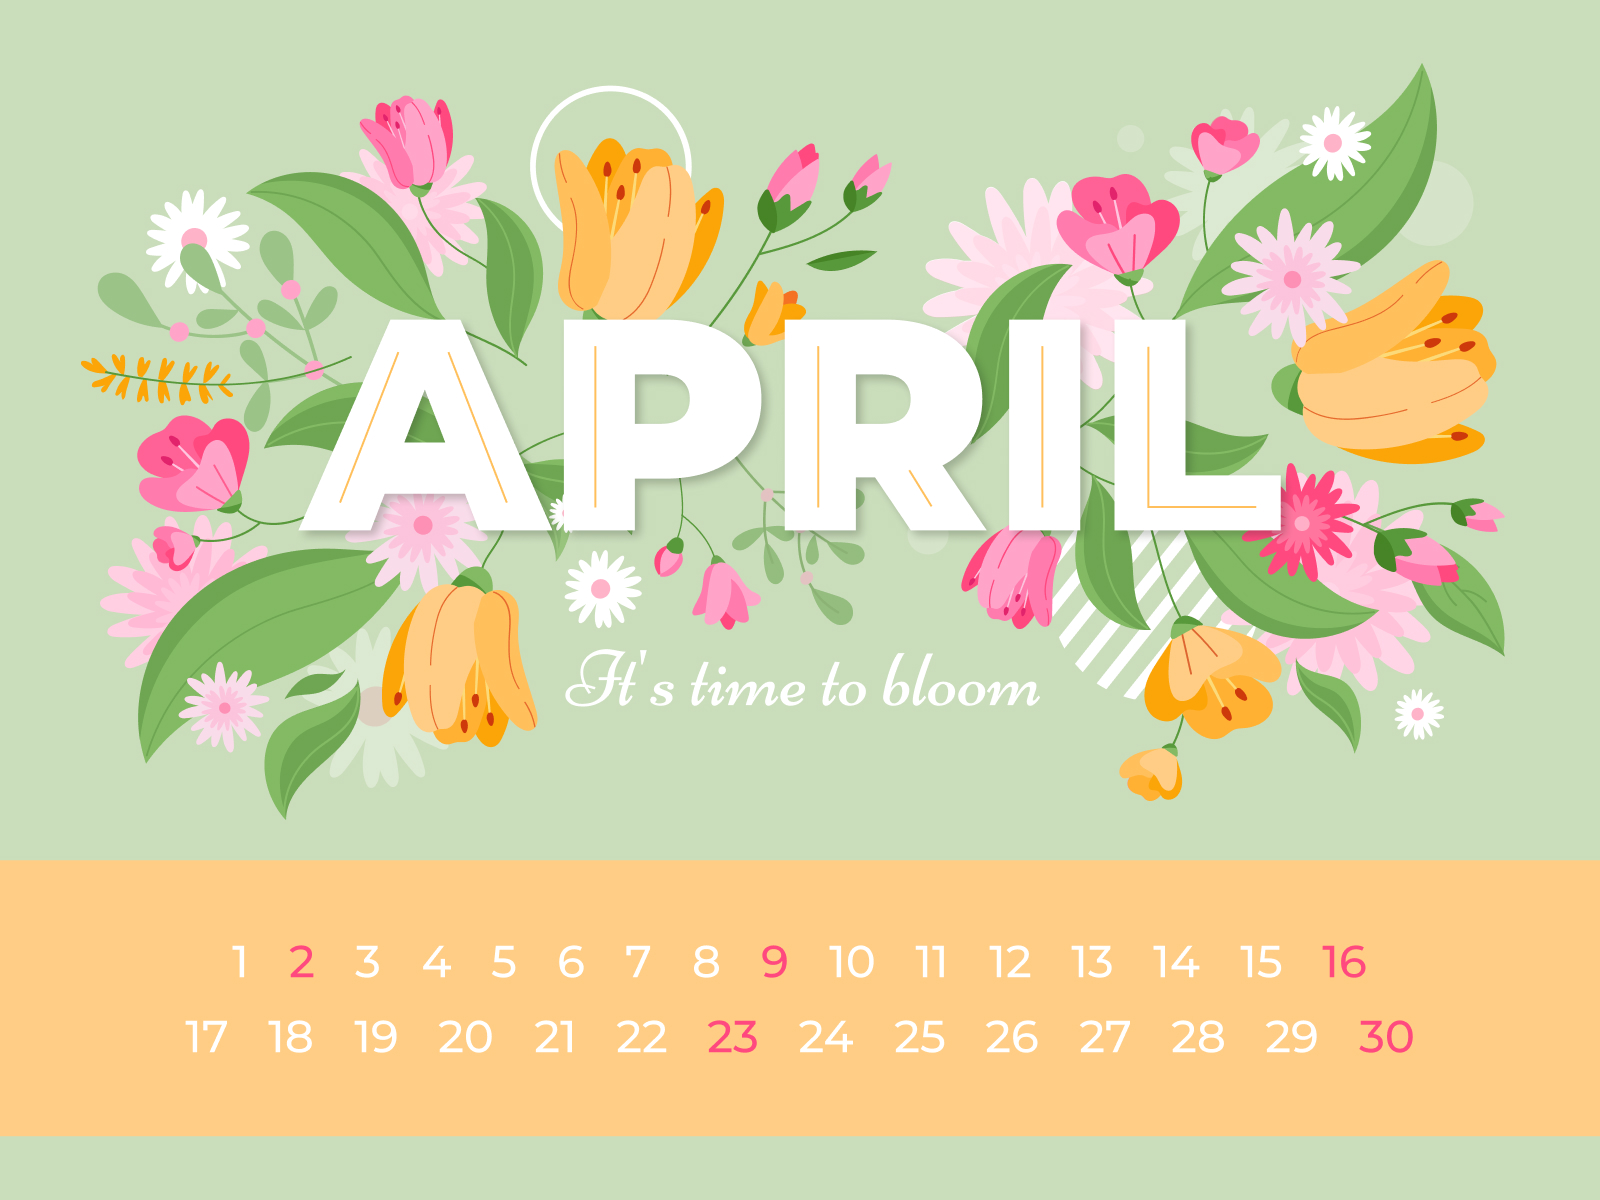 Calendar with flowers and the word april.